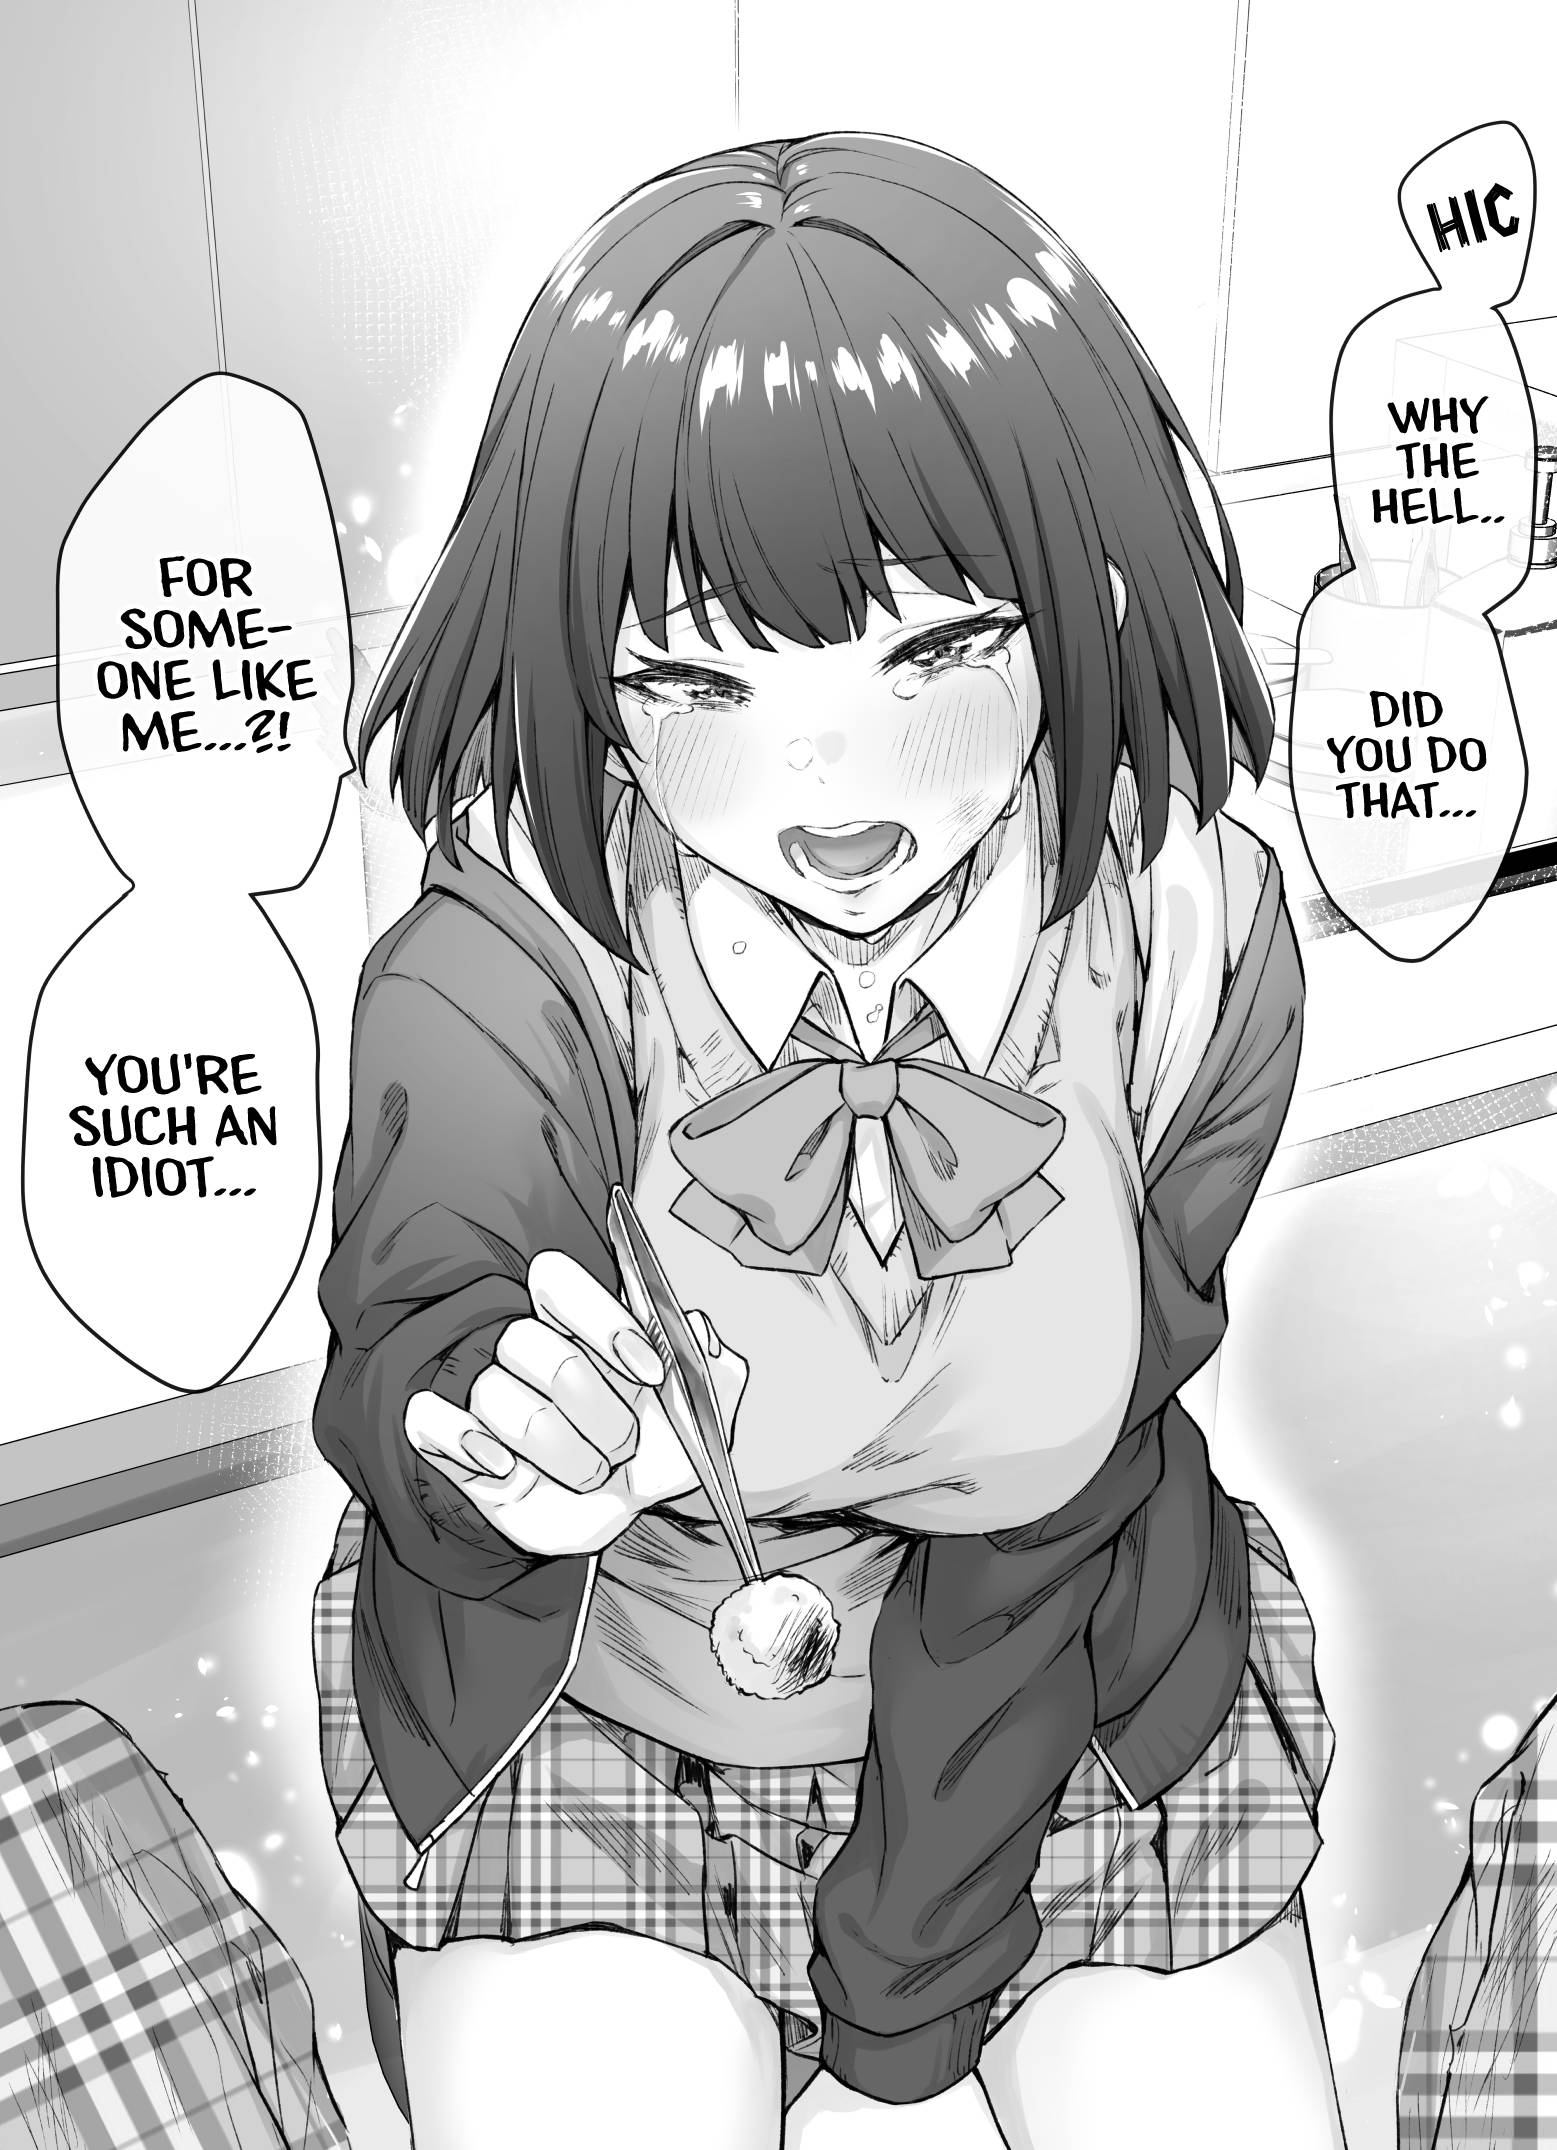 The Tsuntsuntsuntsuntsuntsuntsuntsuntsuntsuntsundere Girl Getting Less and Less Tsun Day by Day - chapter 11 - #1